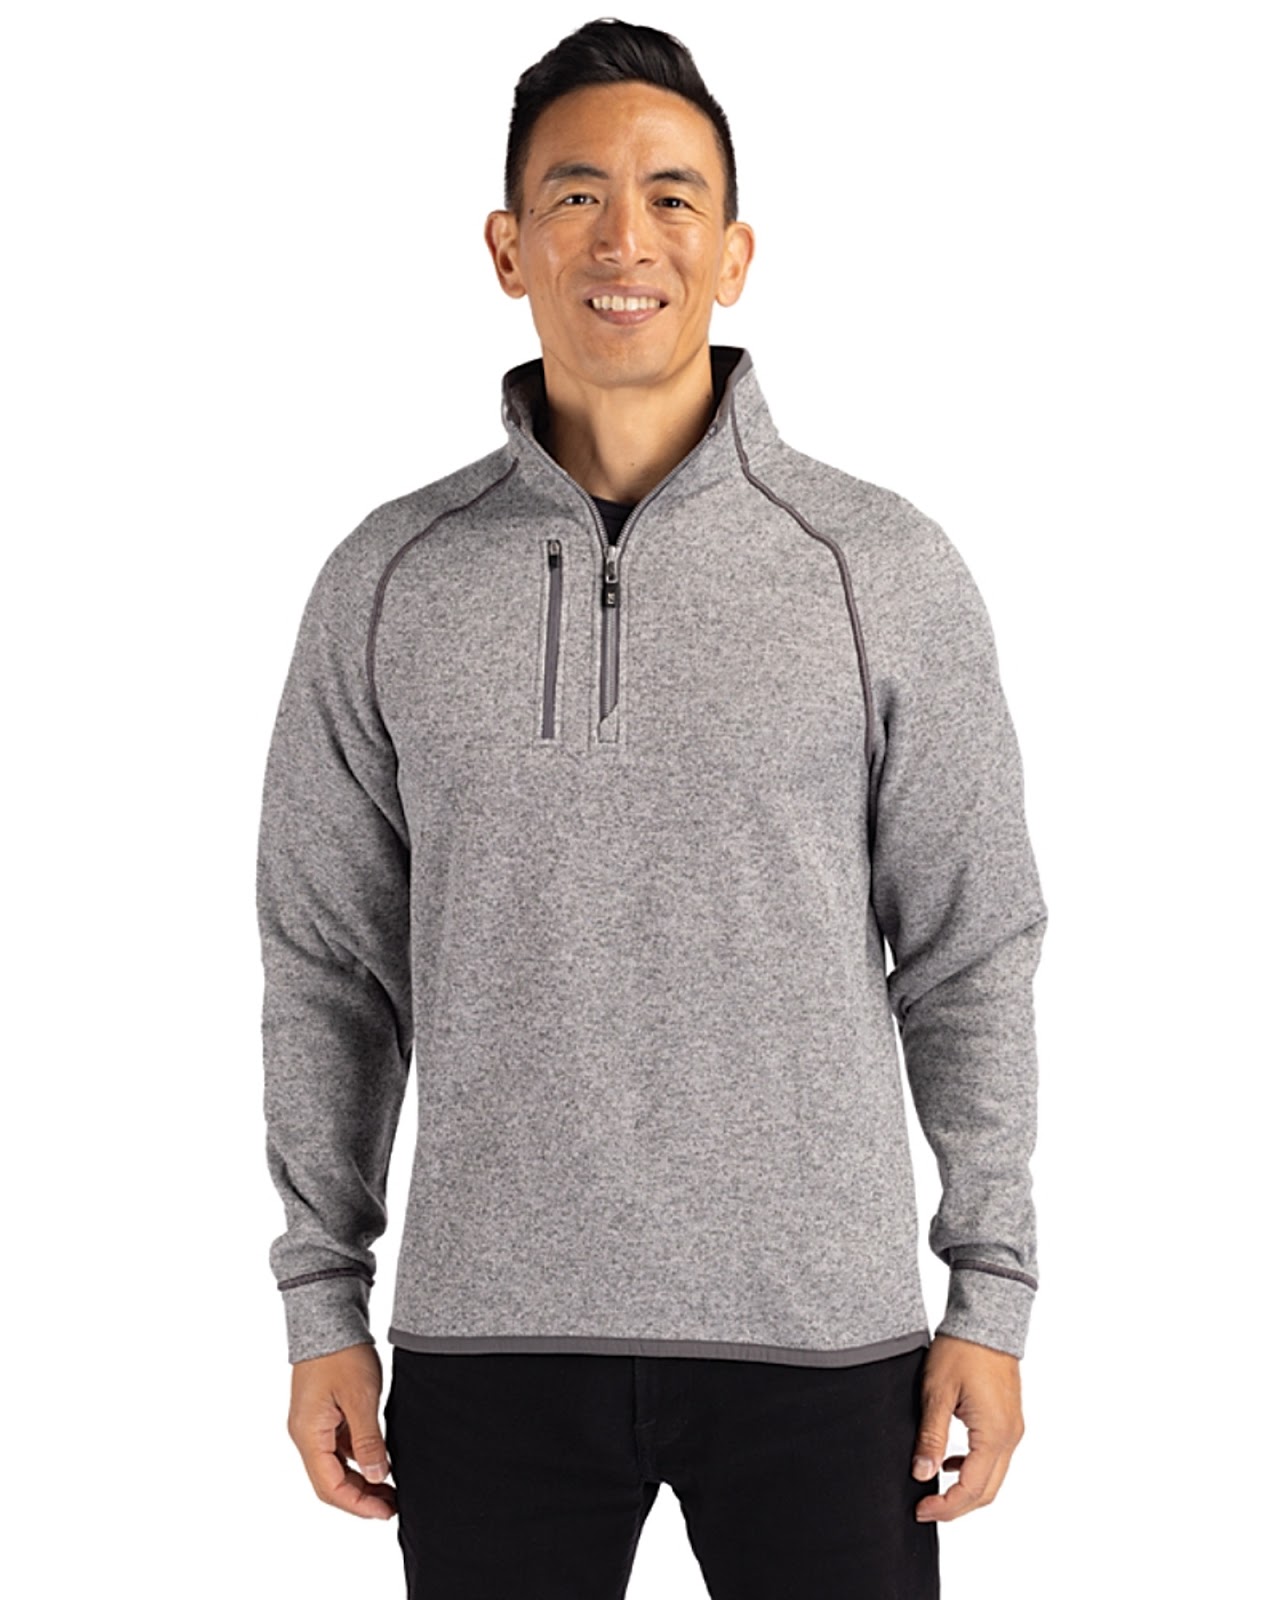 Best mens big and tall half zip pullover 